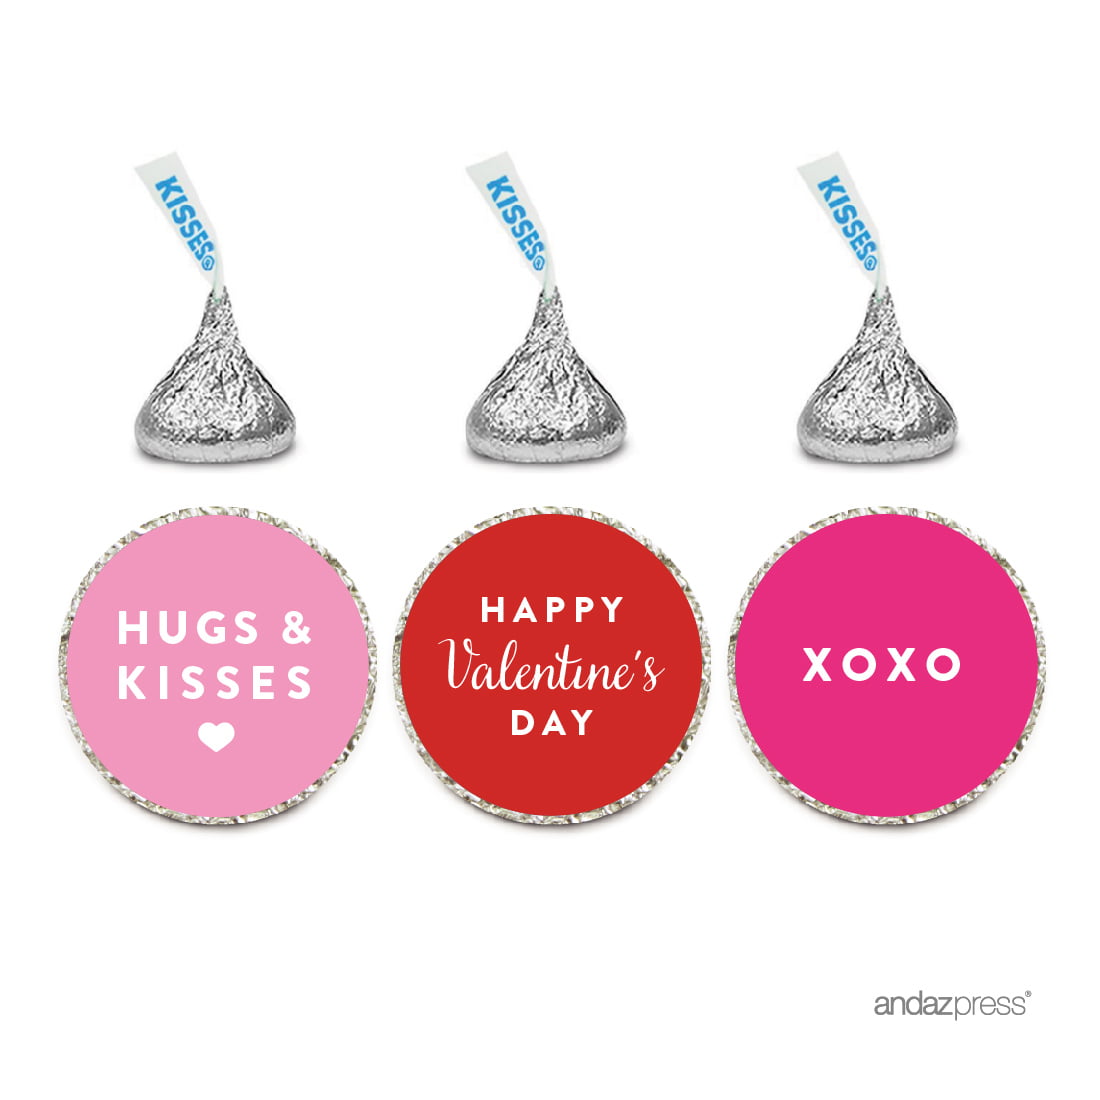 216 HUGS AND KISSES WEDDING FAVORS HERSHEY KISSES KISS LABELS STICKERS 